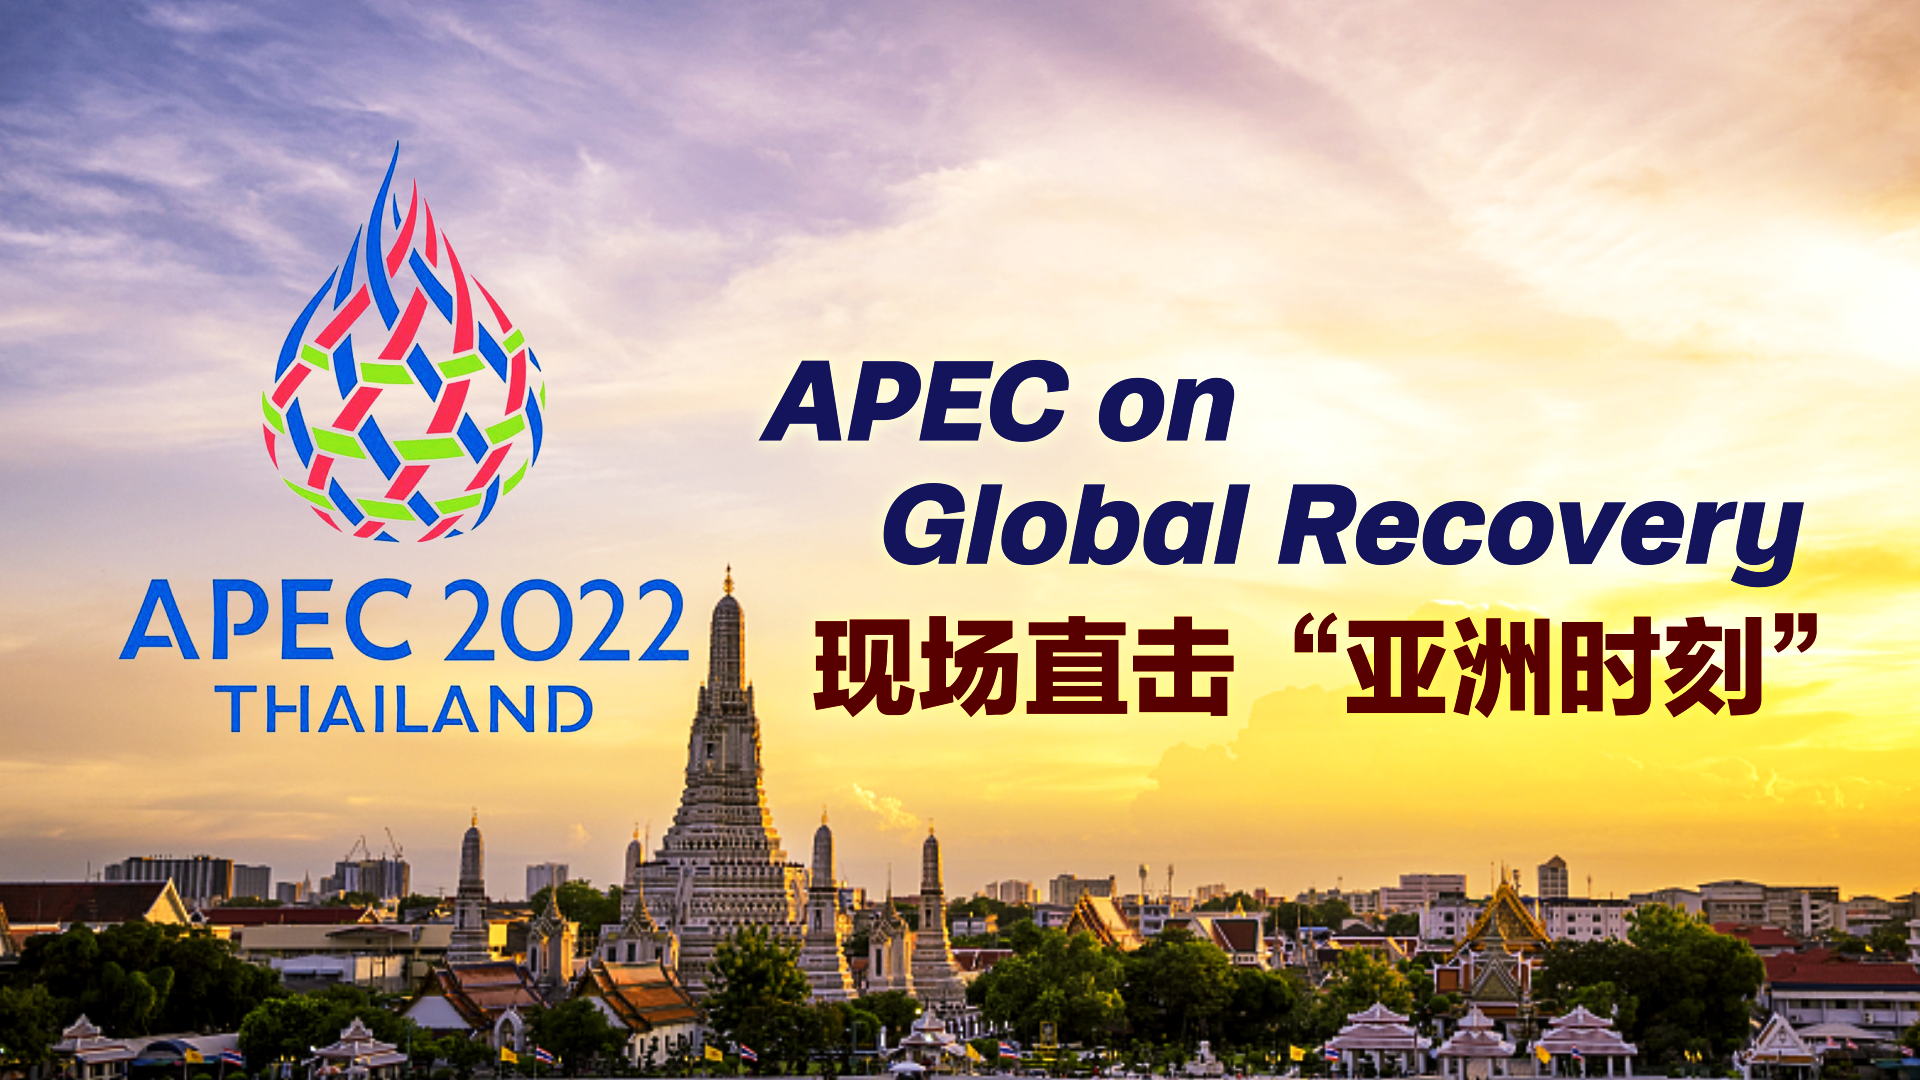 Watch: APEC 2022 eyes global recovery